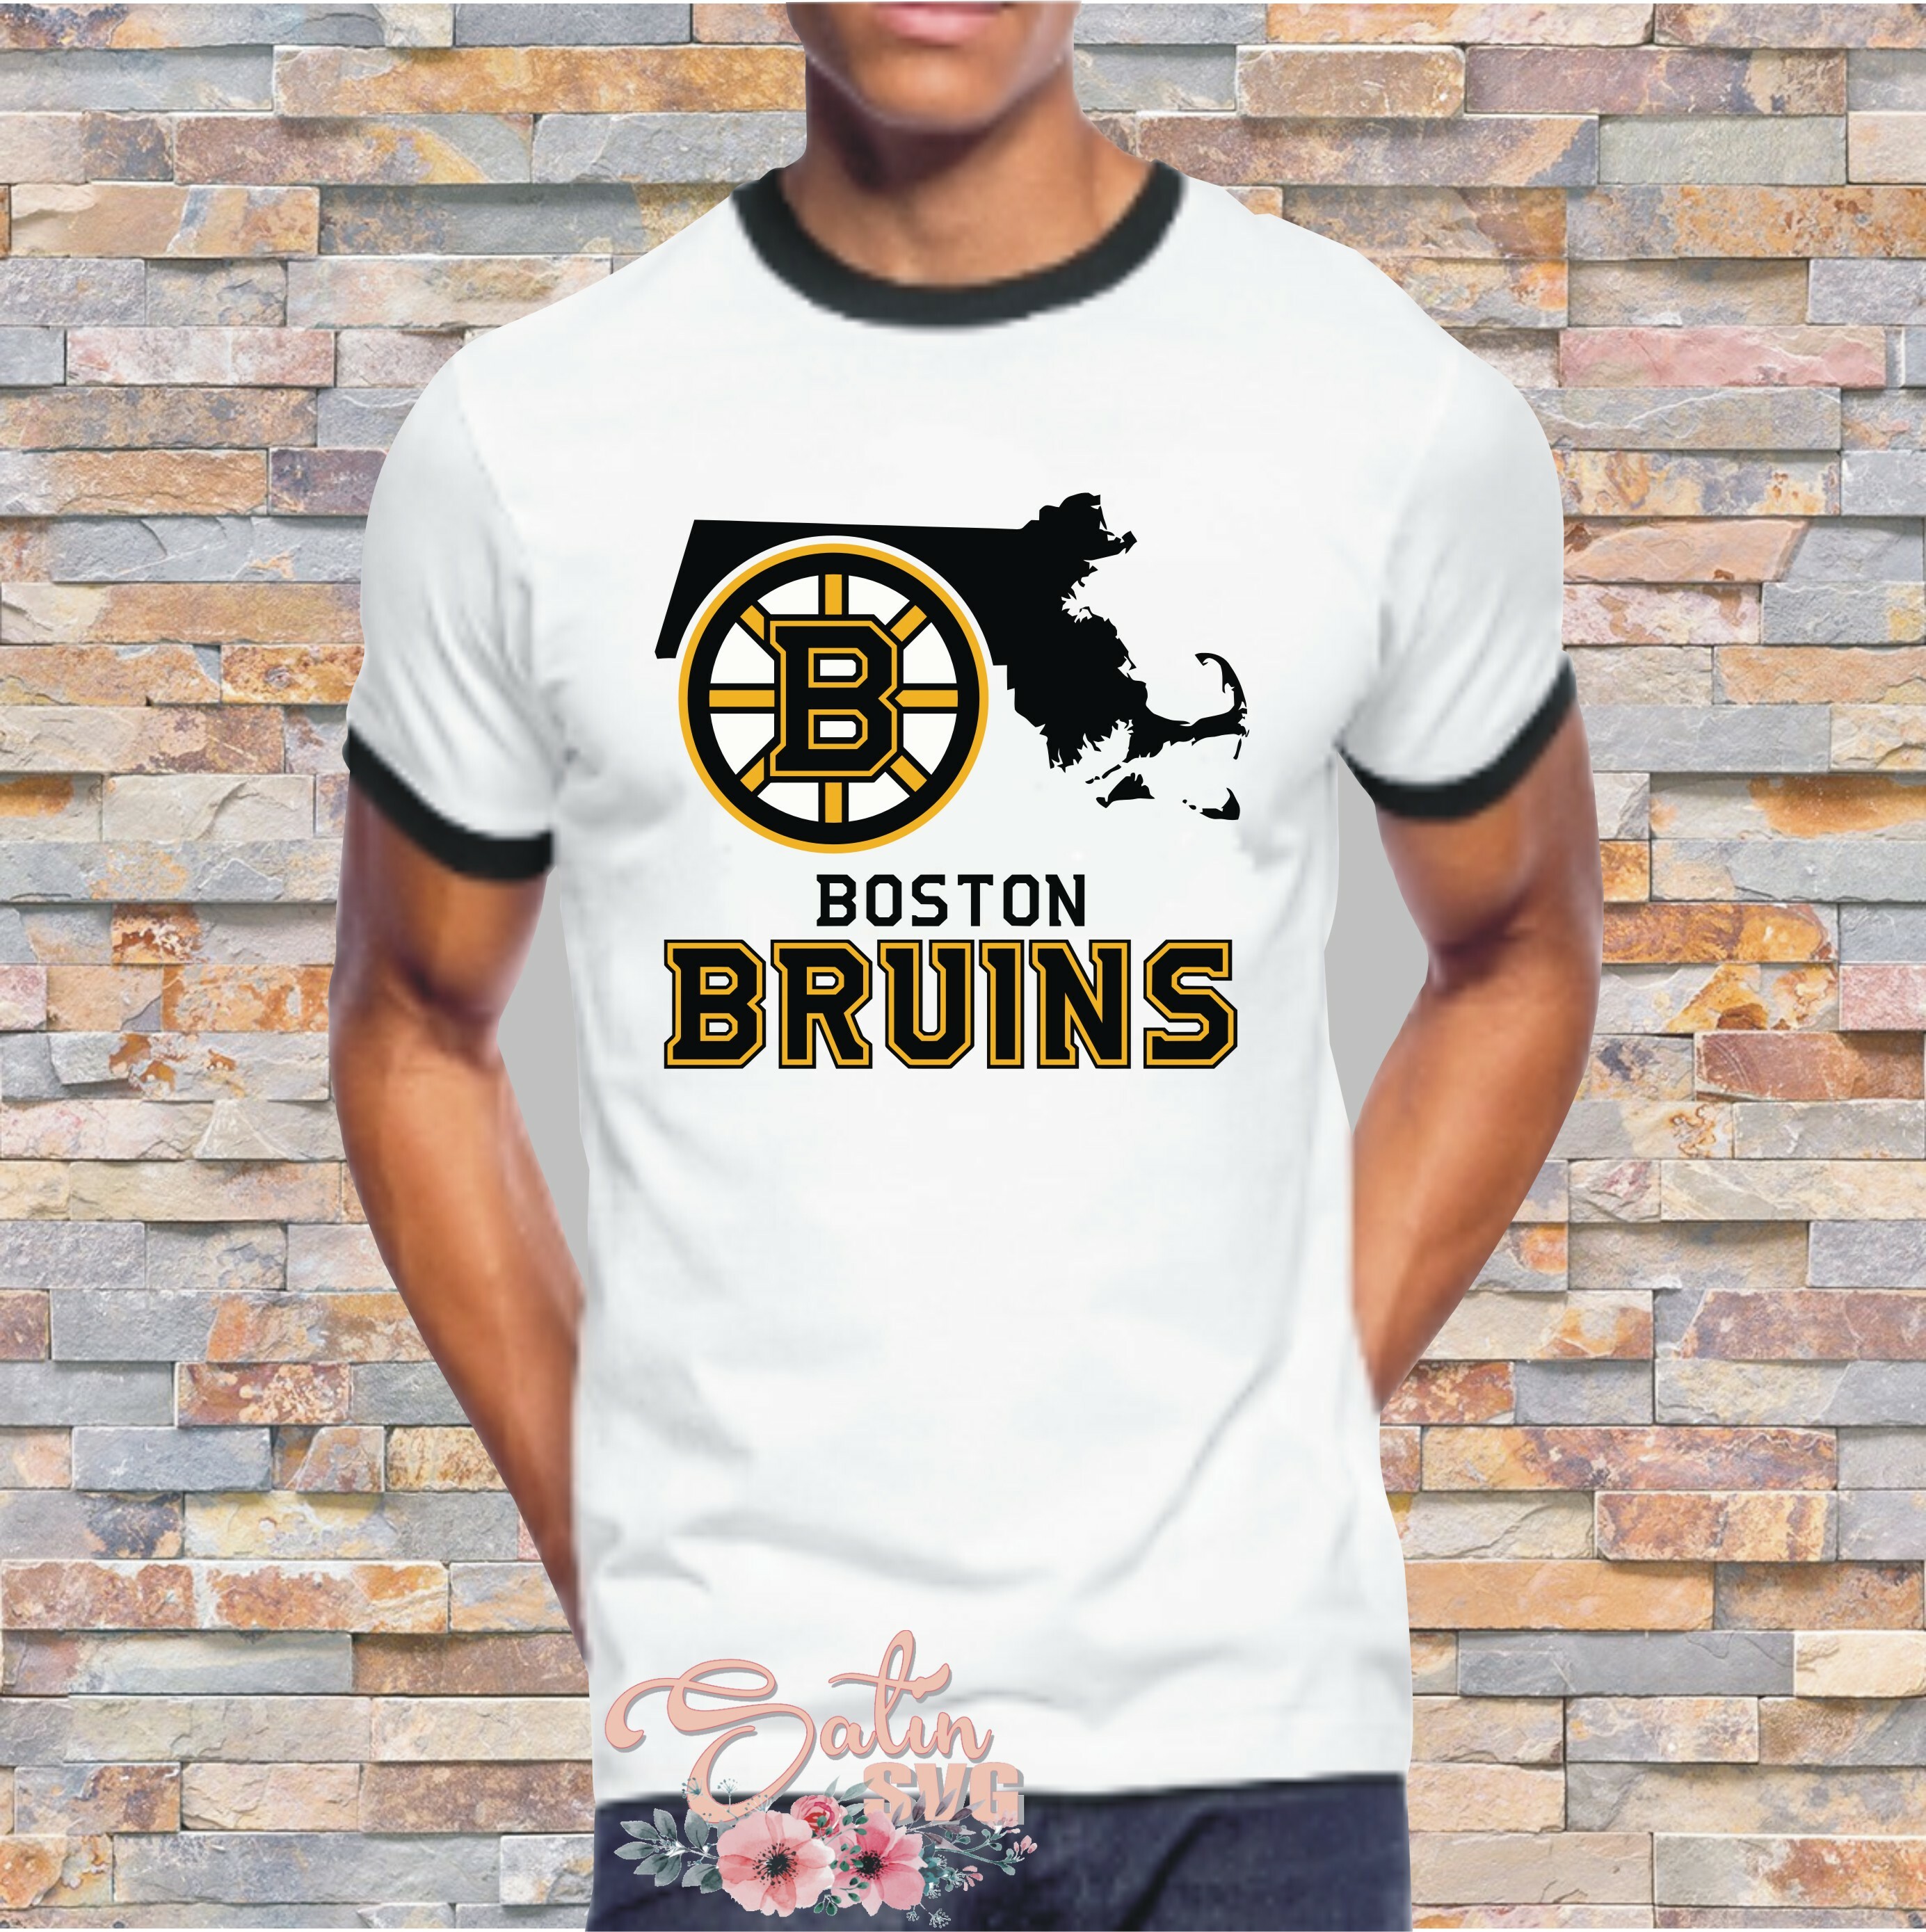 NHL Logo Boston Bruins, Boston Bruins SVG Vector, Boston Bruins Clipart, Boston  Bruins Ice Hockey Kit SVG, DXF, PNG, EPS Instant Download NHL-Files For  Silhouette, Files For Clipping. - Gravectory